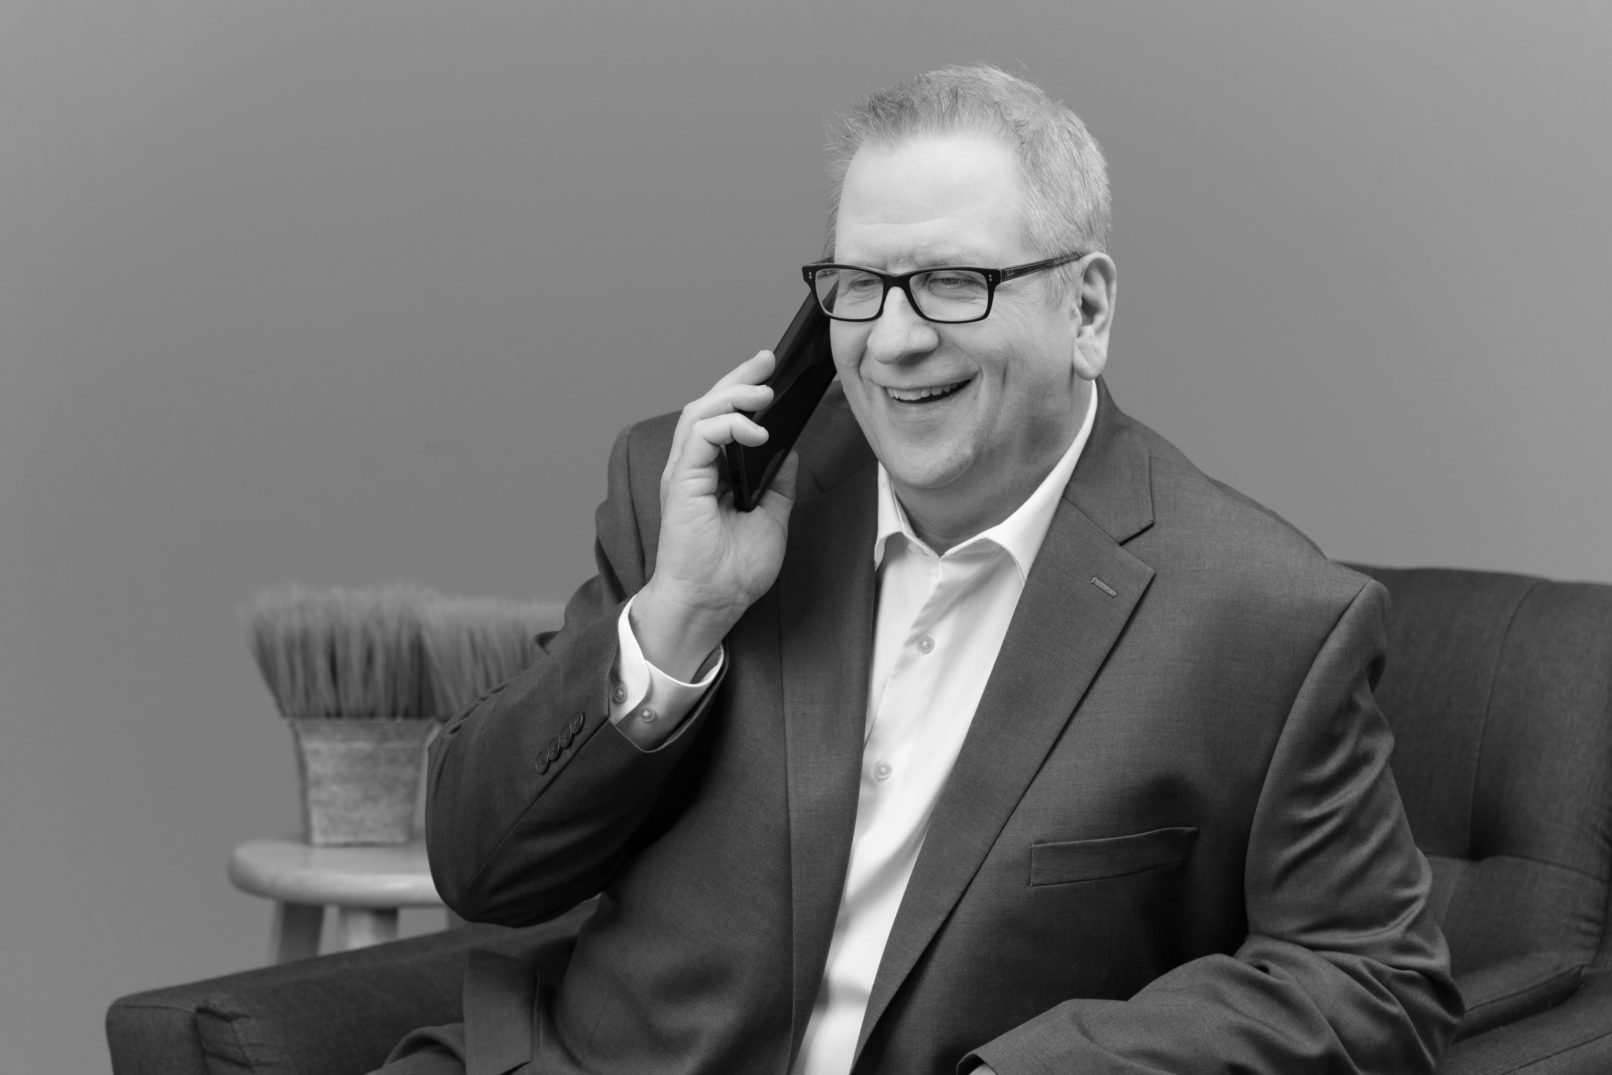 Portrait-Personal Branding photo of a man in glasses wearing a suit and talking on the cellphone in black and white.